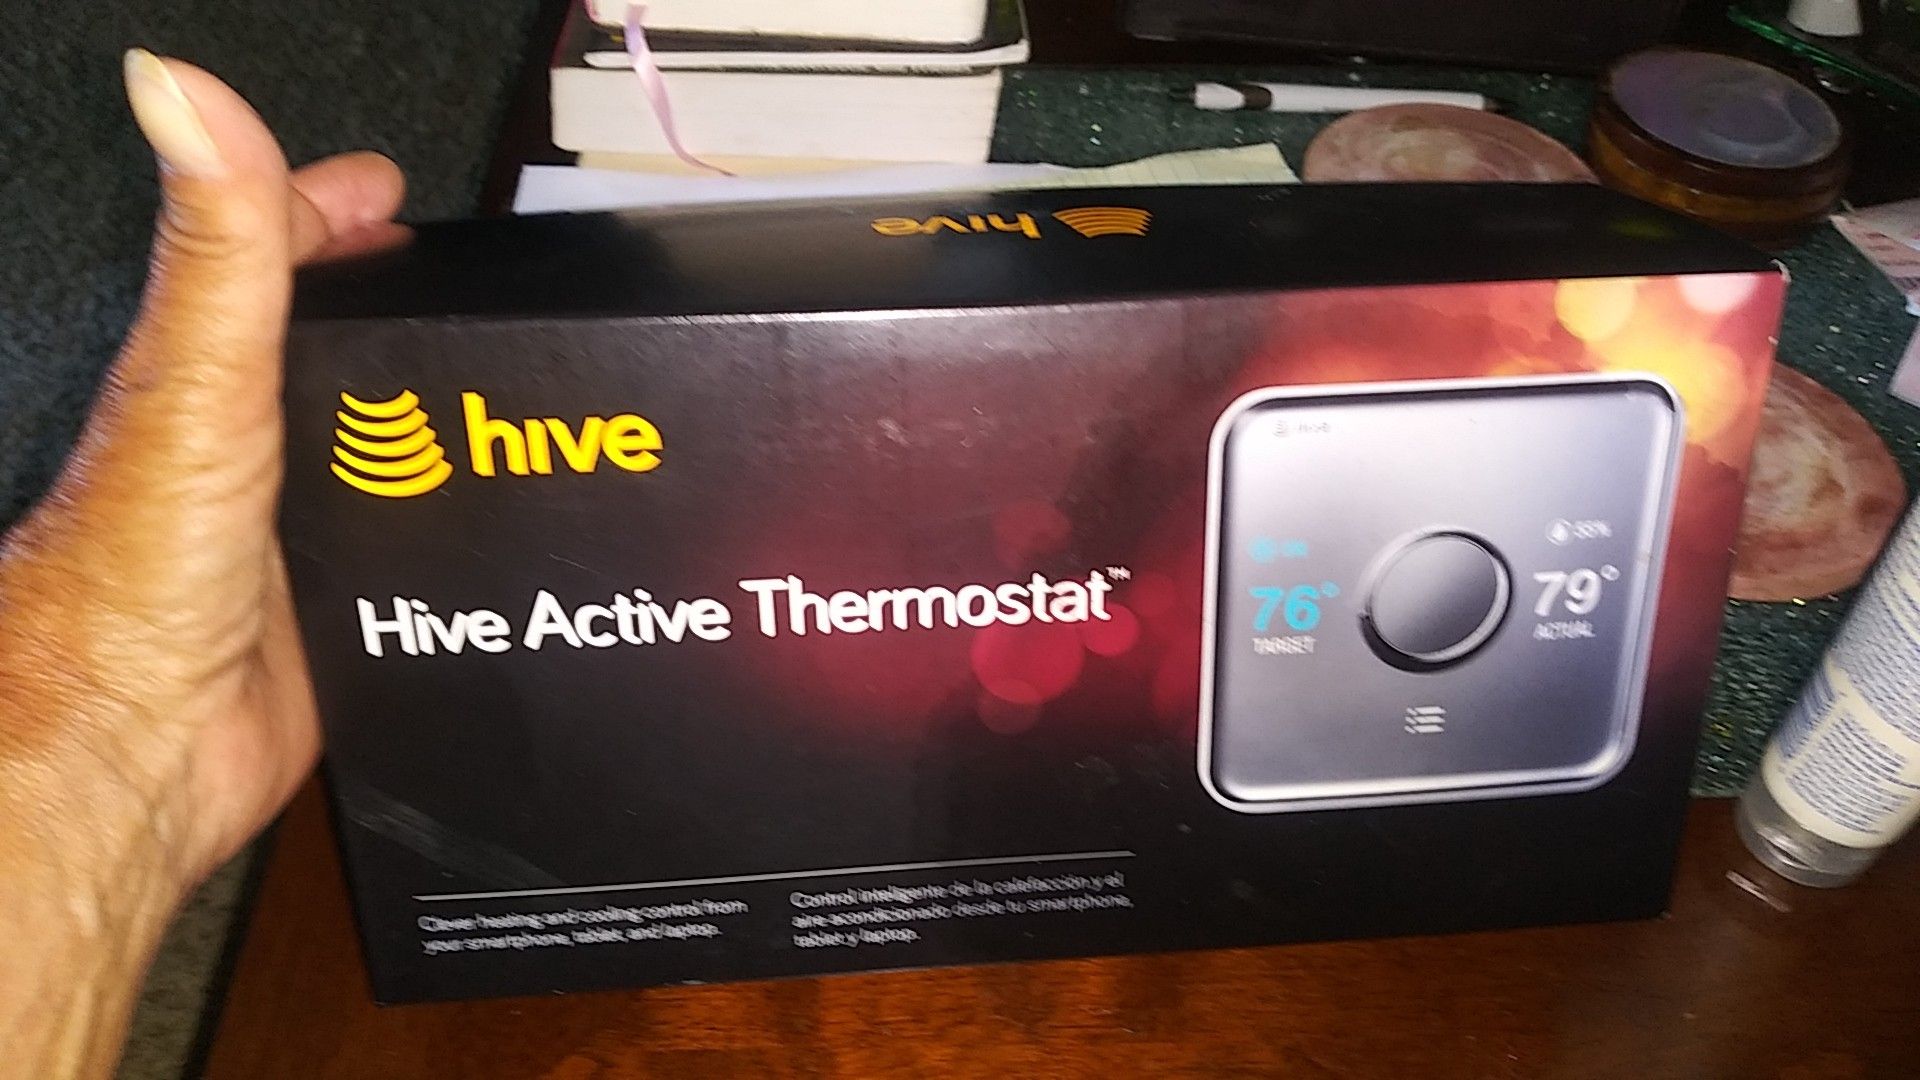 Hive active thermostat